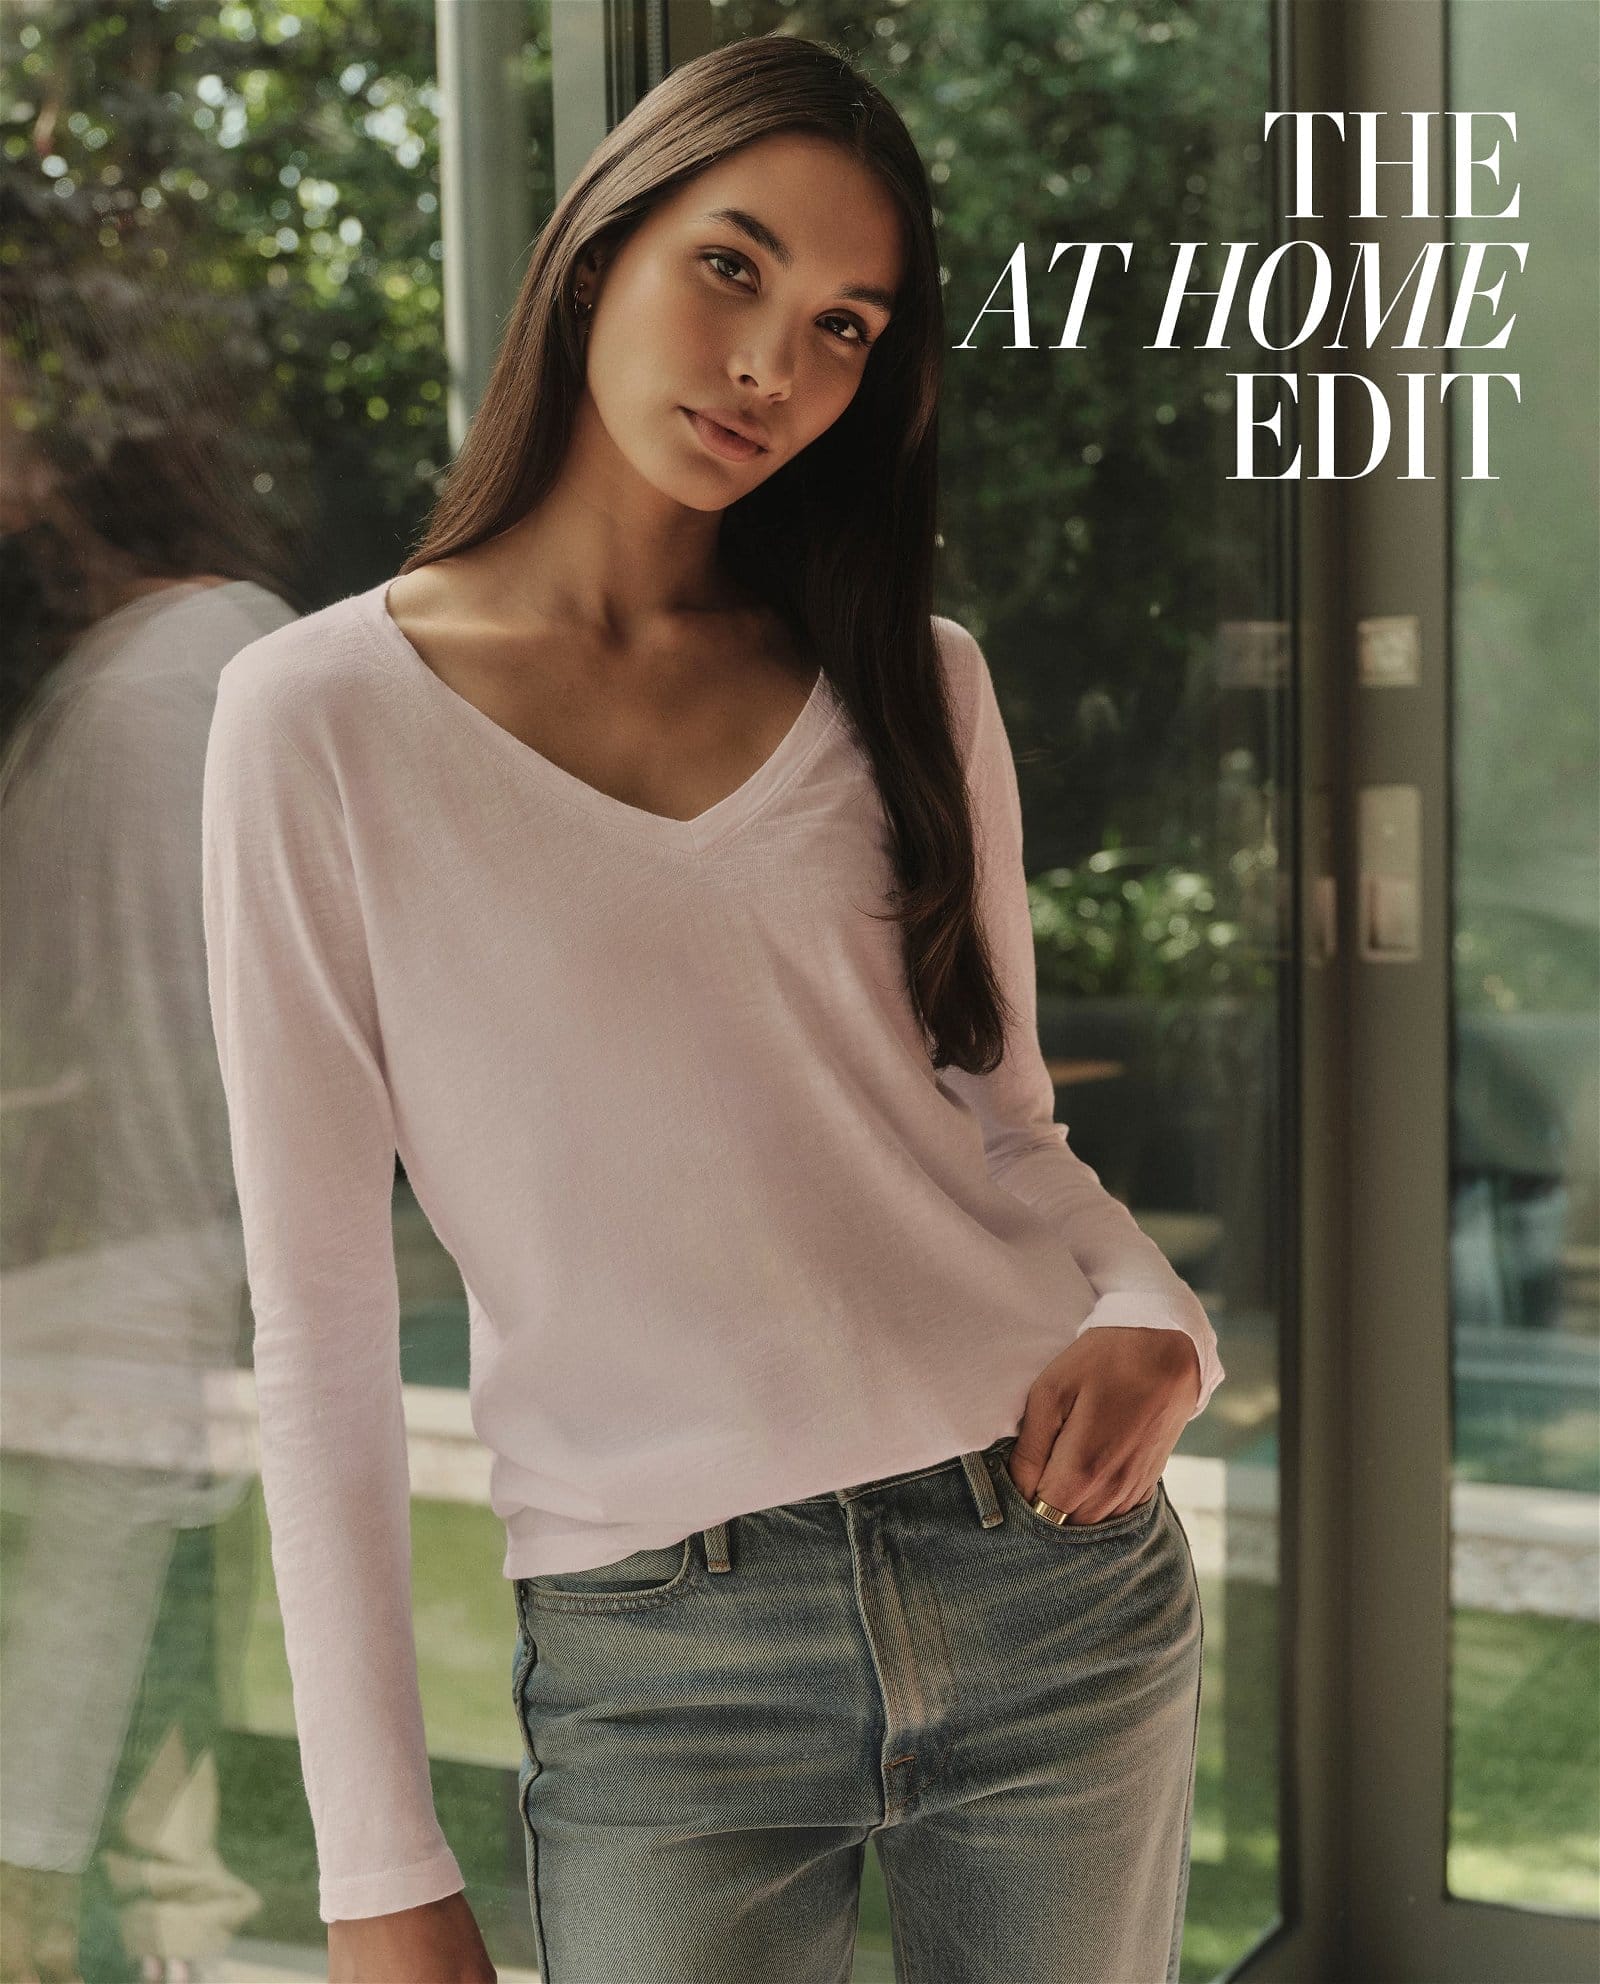 THE AT HOME EDIT